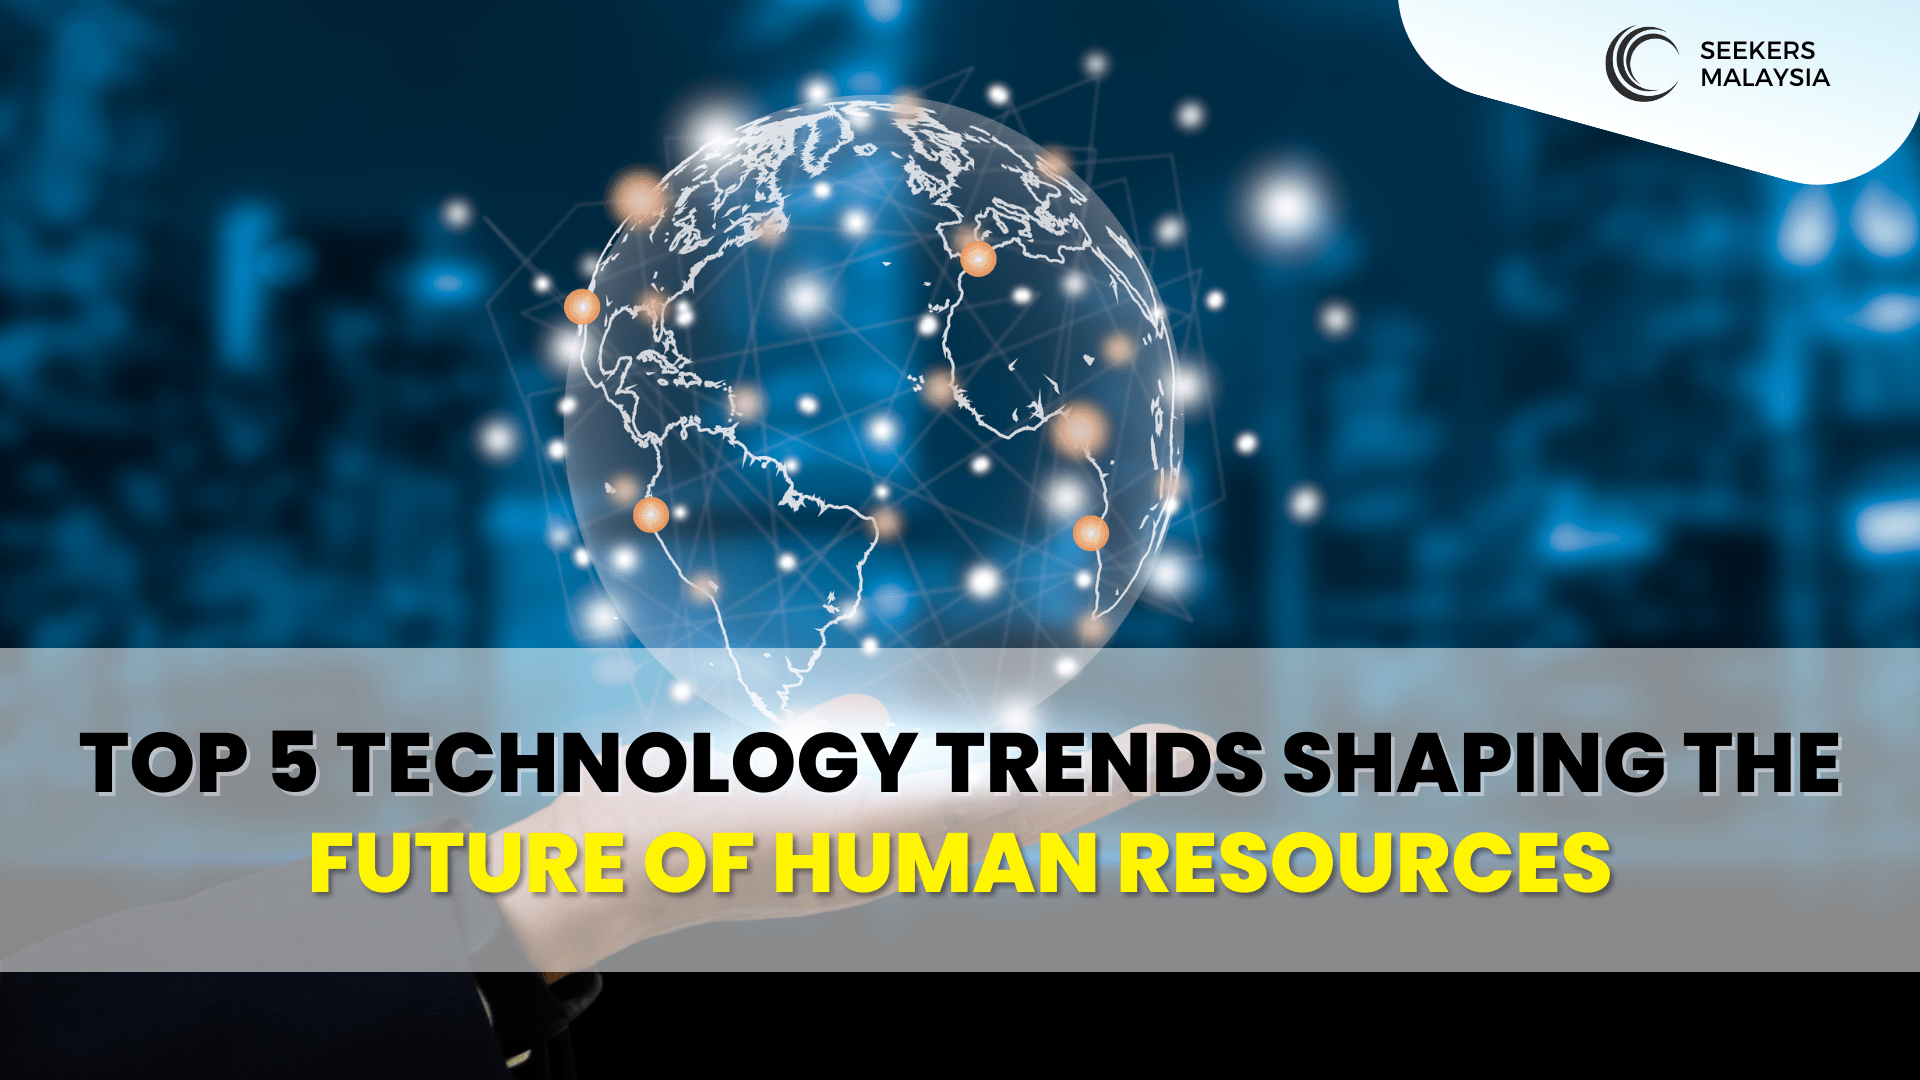 Top 5 Technology Trends Shaping the Future of Human Resources